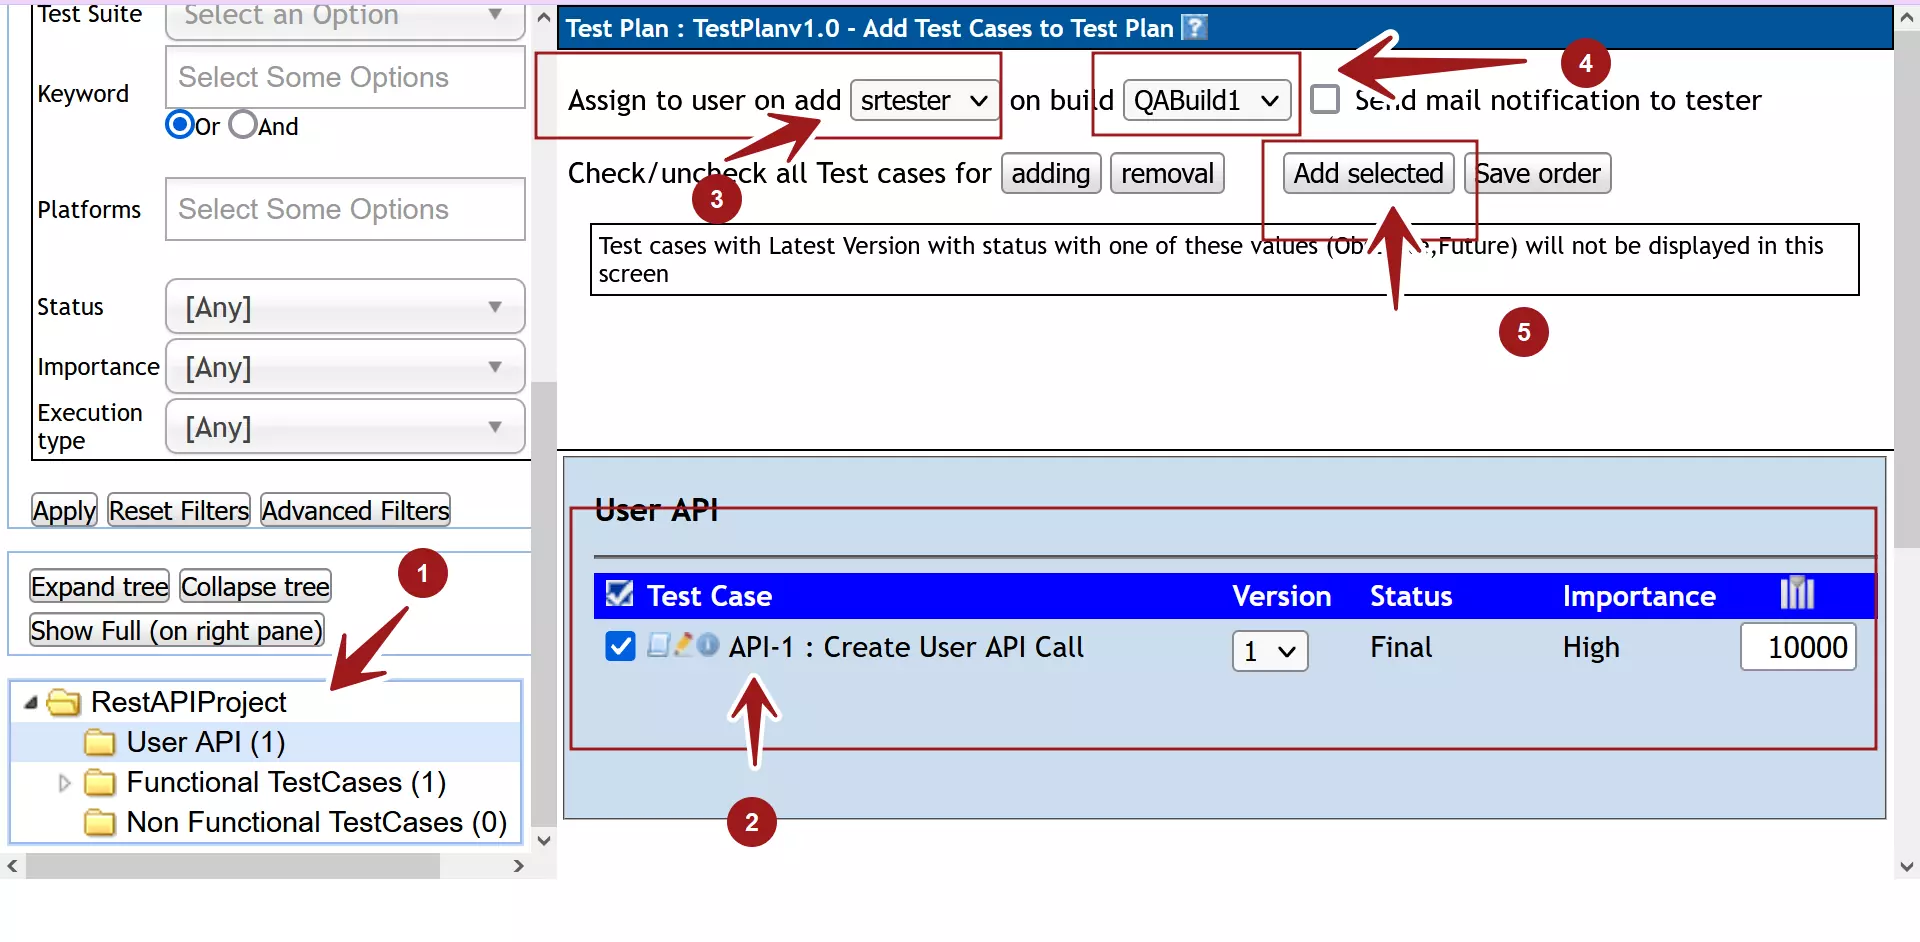 Select Test Cases and Add TestLink